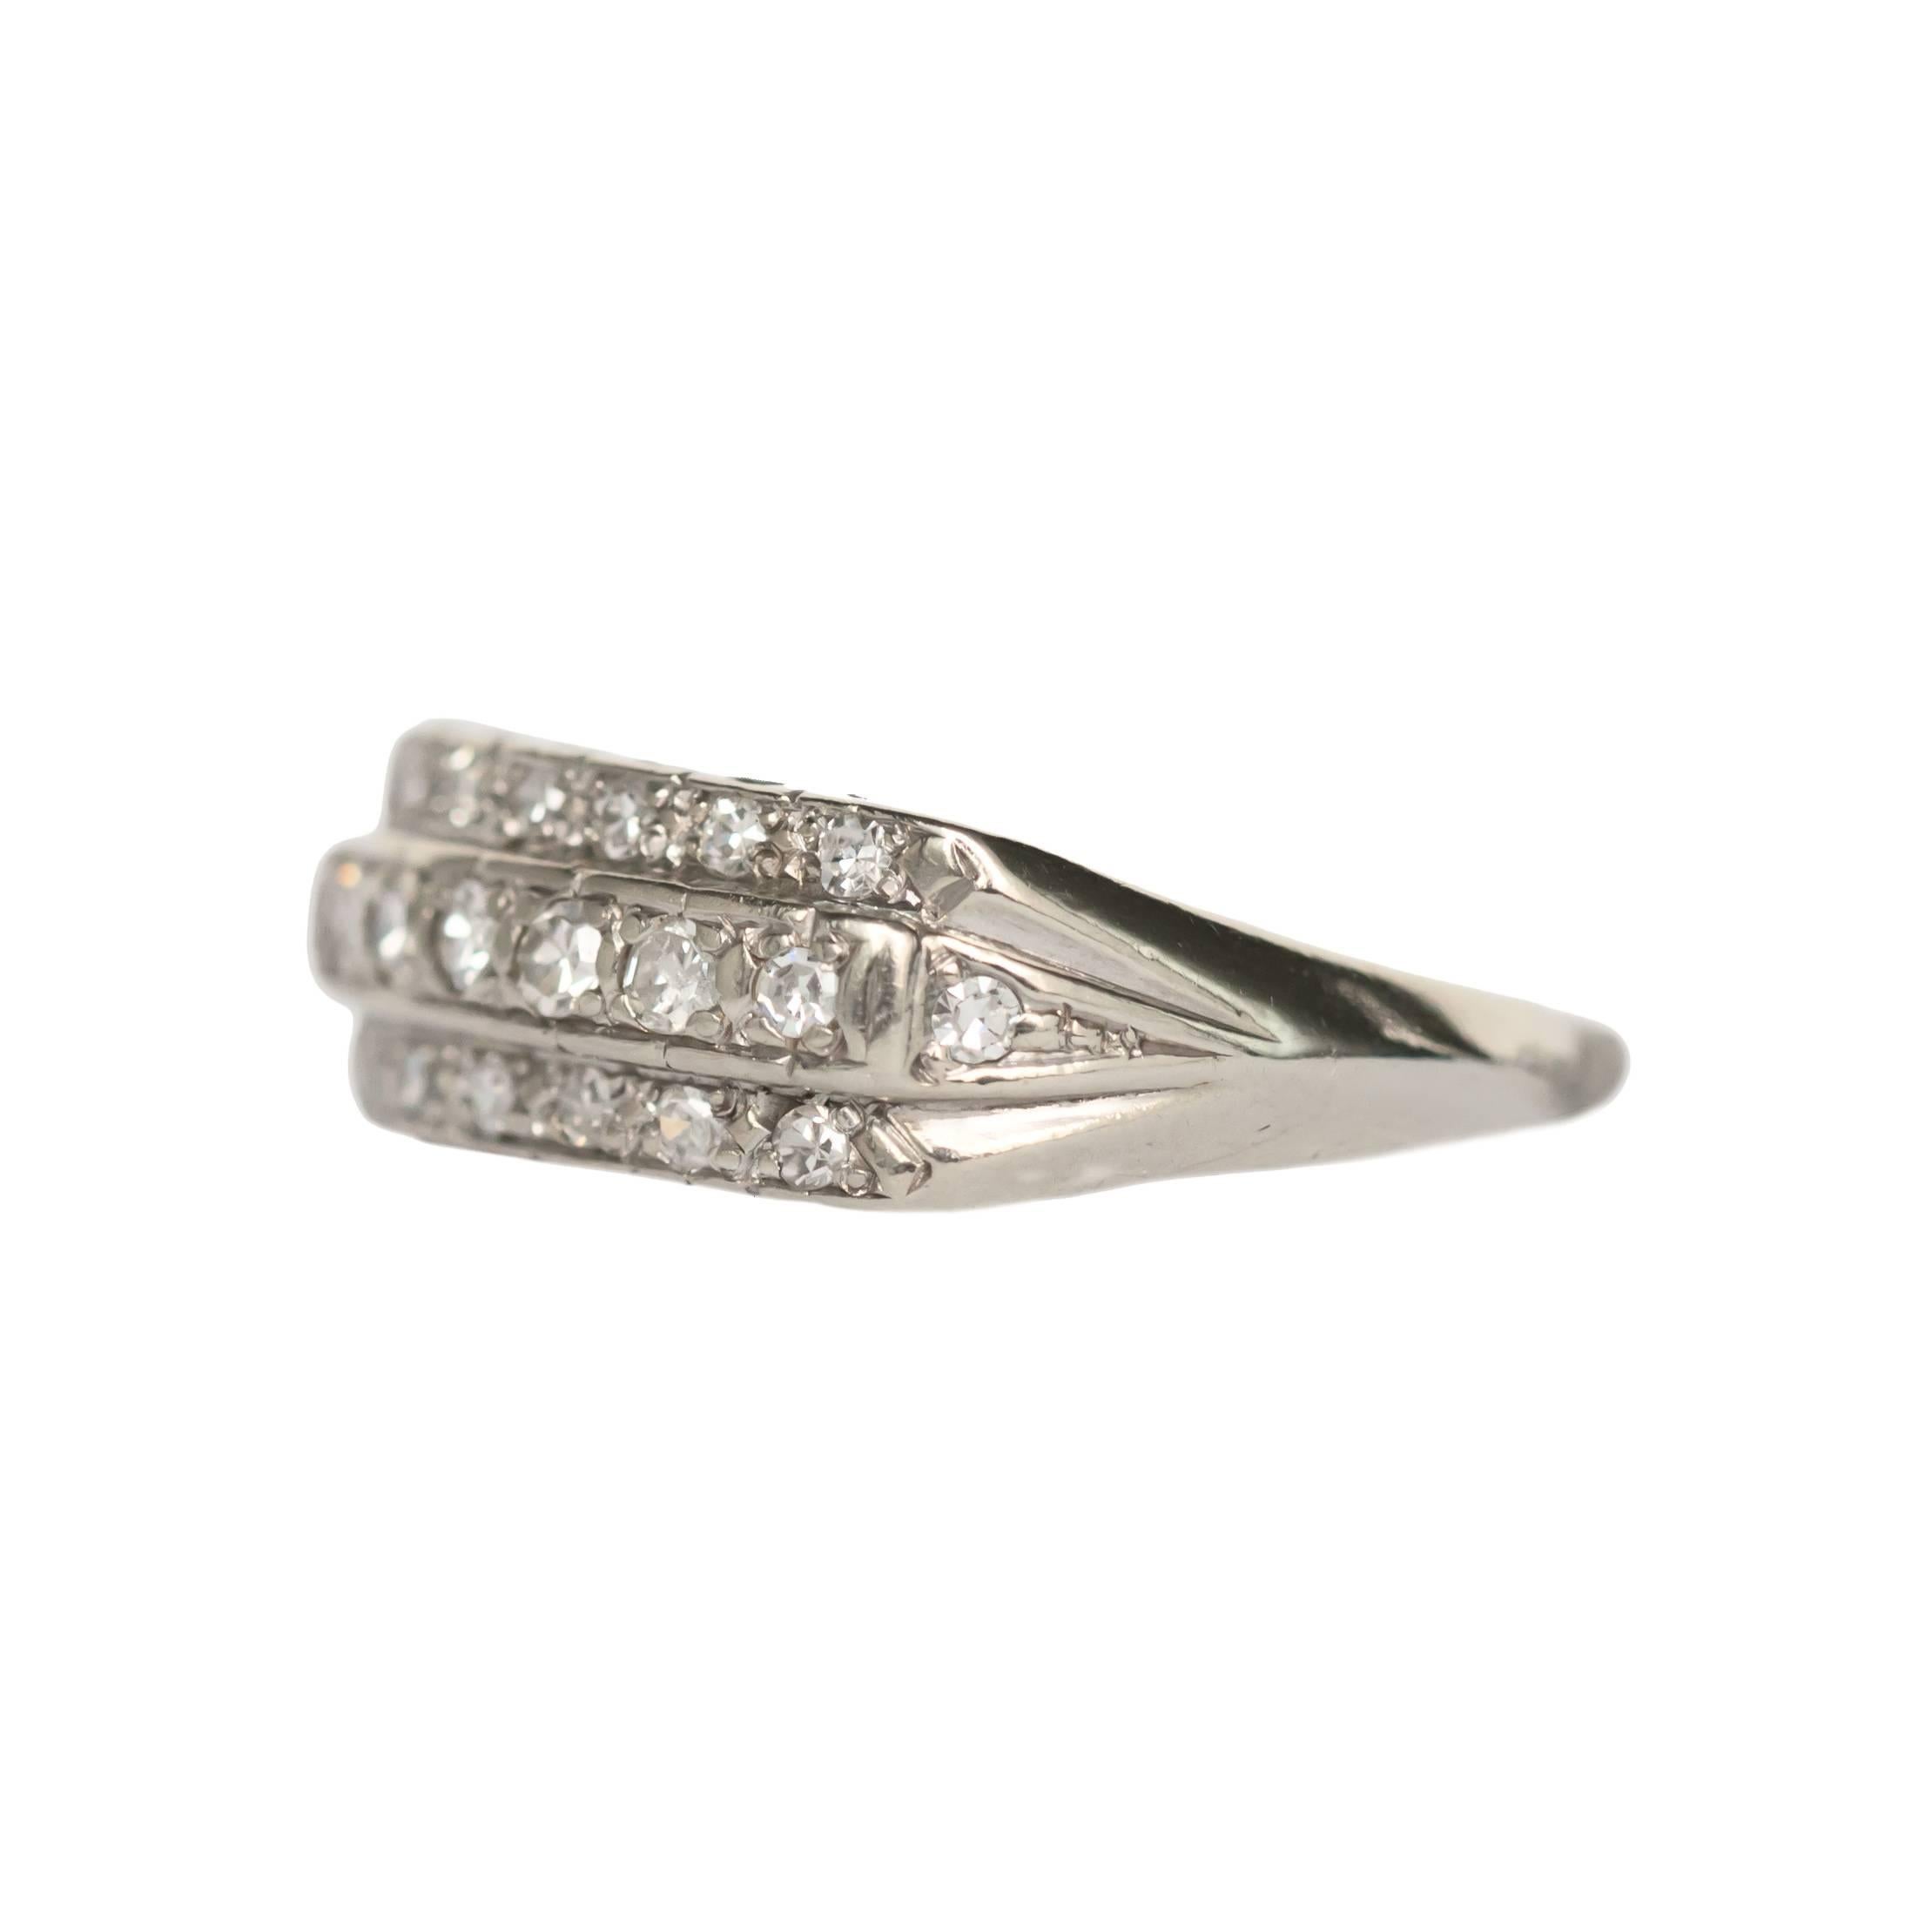 Item Details: 
Ring Size: Approximately 6.85
Metal Type: 14 Karat White Gold
Weight: 4.1 grams

Diamond Details:
Shape: Antique Single Cut
Carat Weight: .30 carat, total weight
Color: G-H
Clarity: VS

Finger to Top of Stone Measurement: 4.19mm